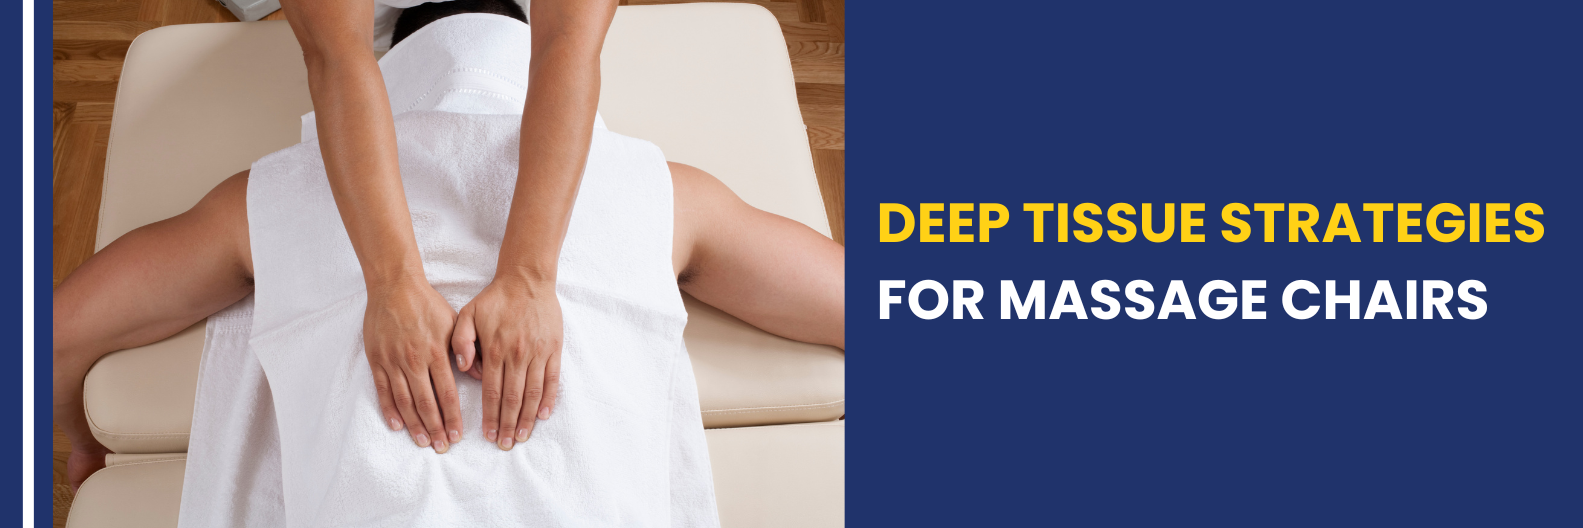 Discover deep tissue massage with chairs designed for profound muscle relief and rejuvenation, a true therapeutic wonder.